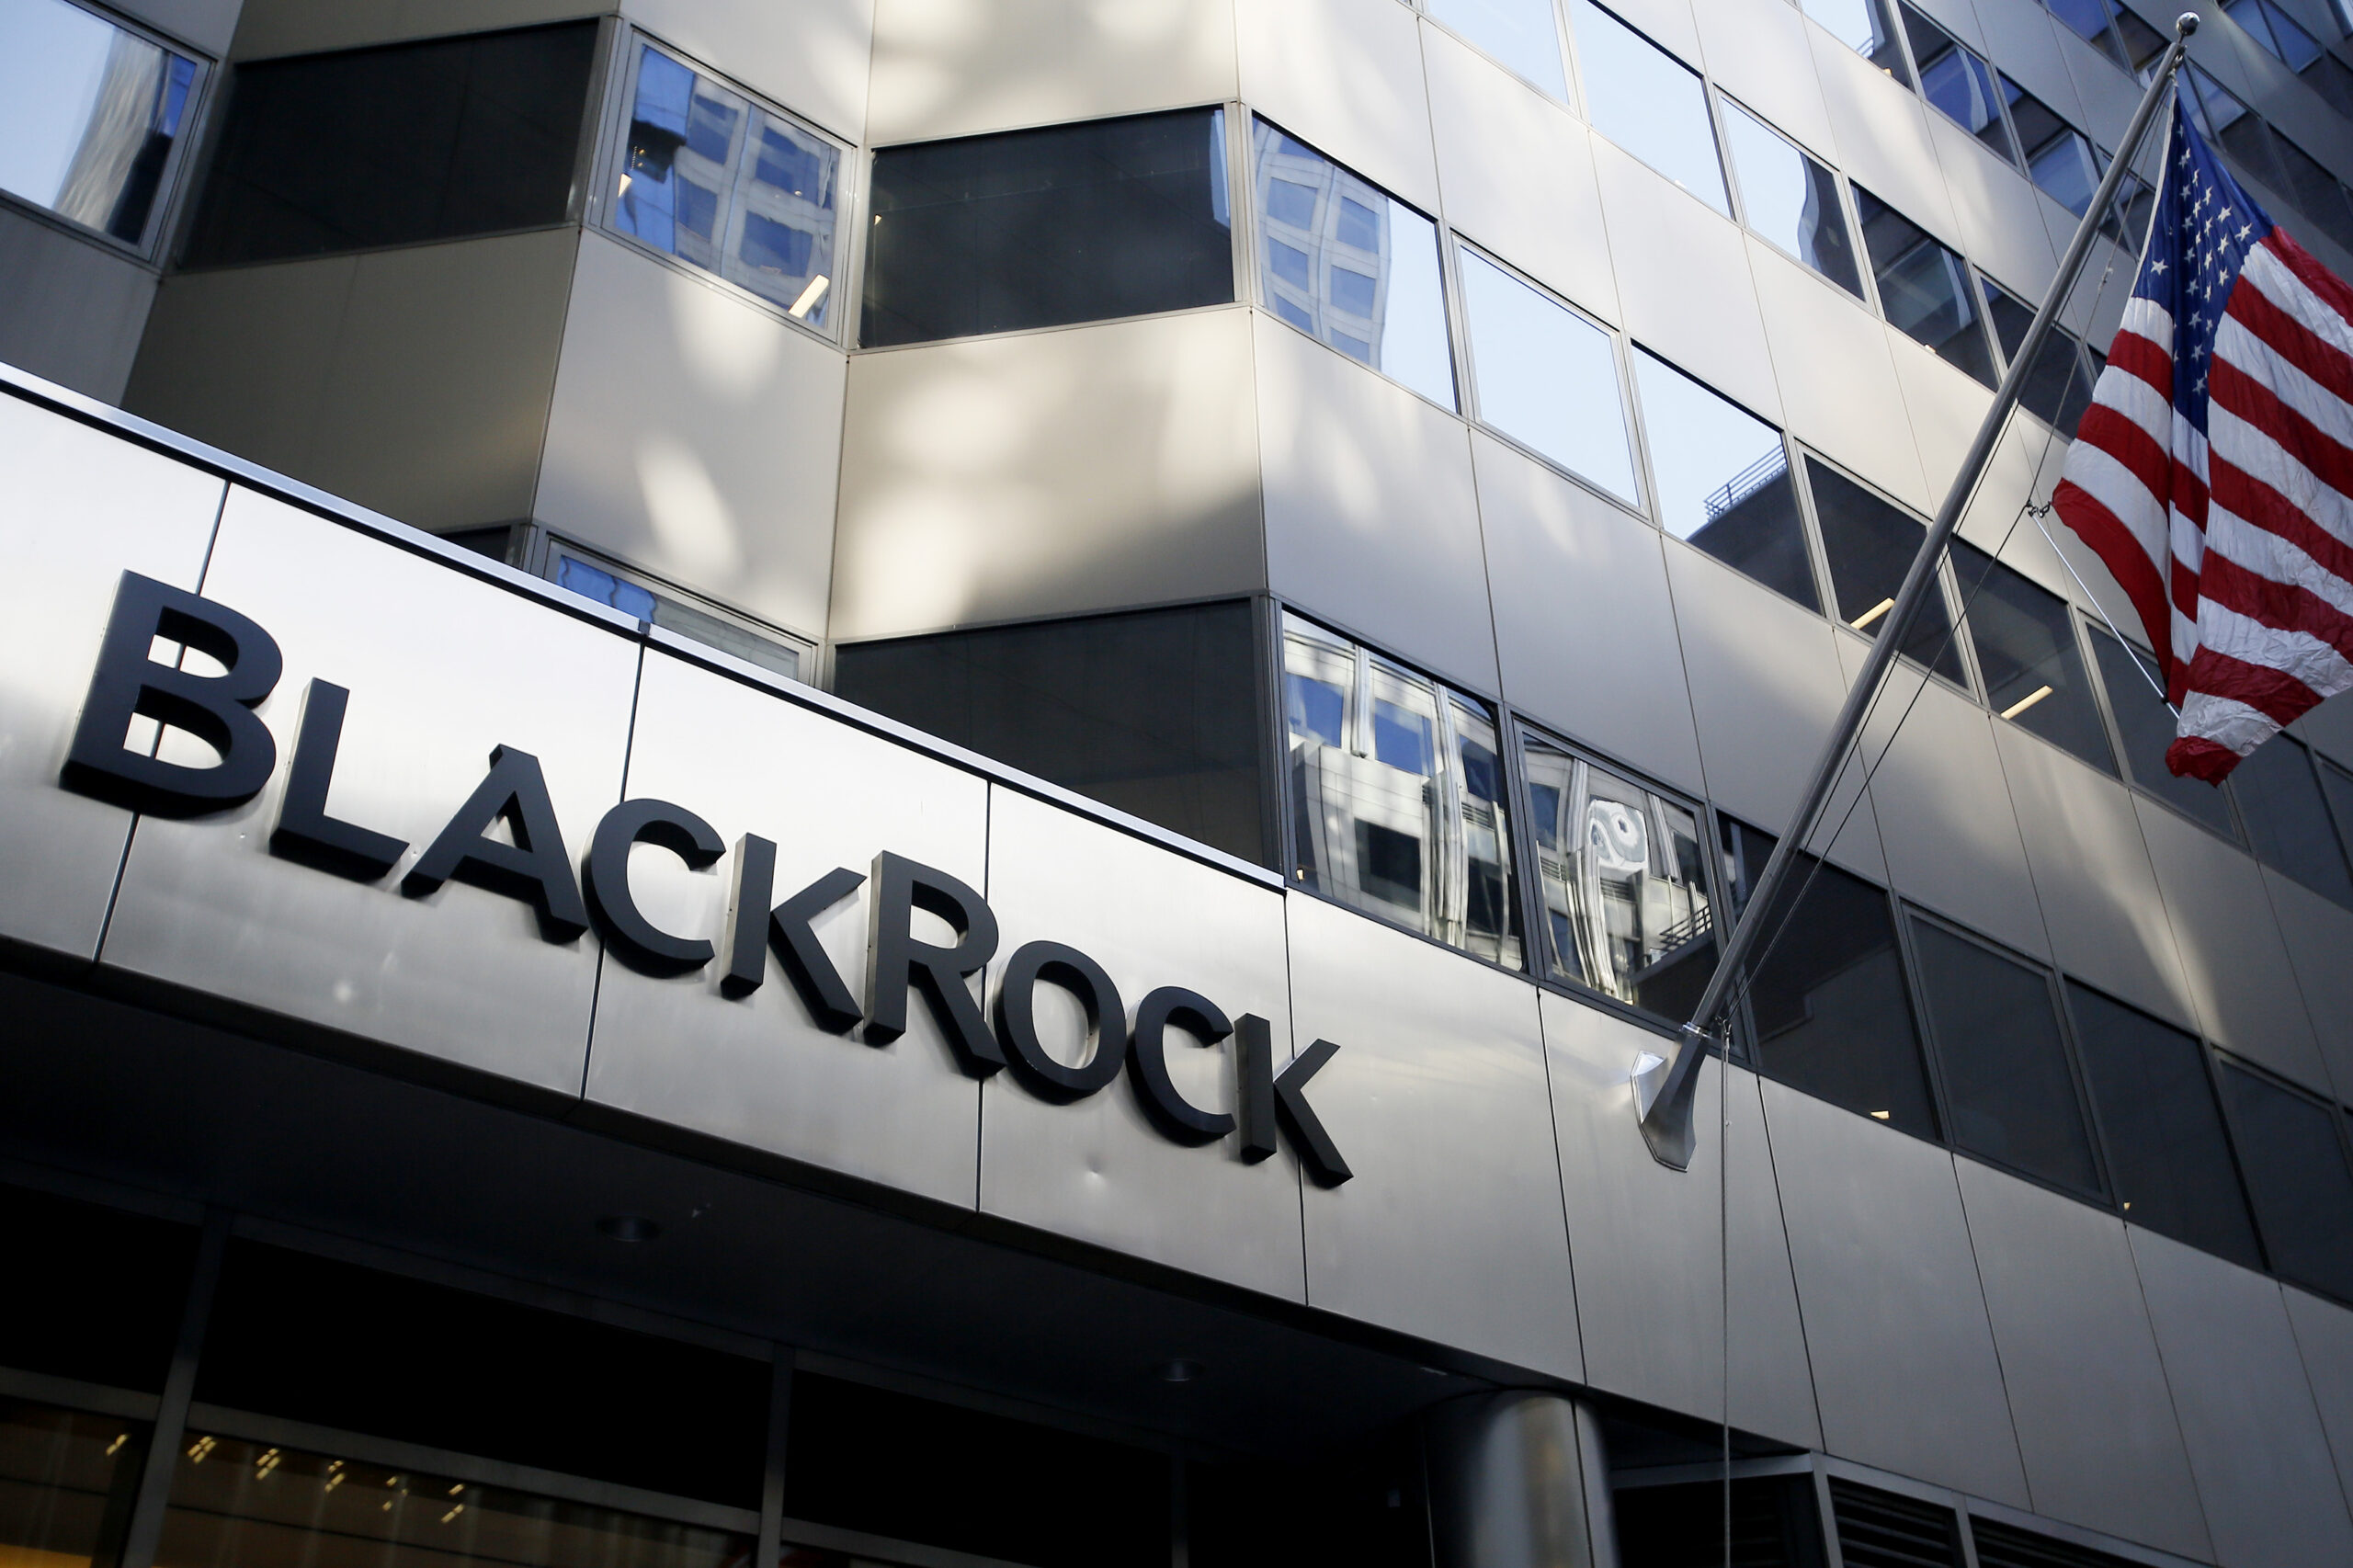 Republican AGs argue BlackRock should be banned from investing in utilities due to ESG initiatives.